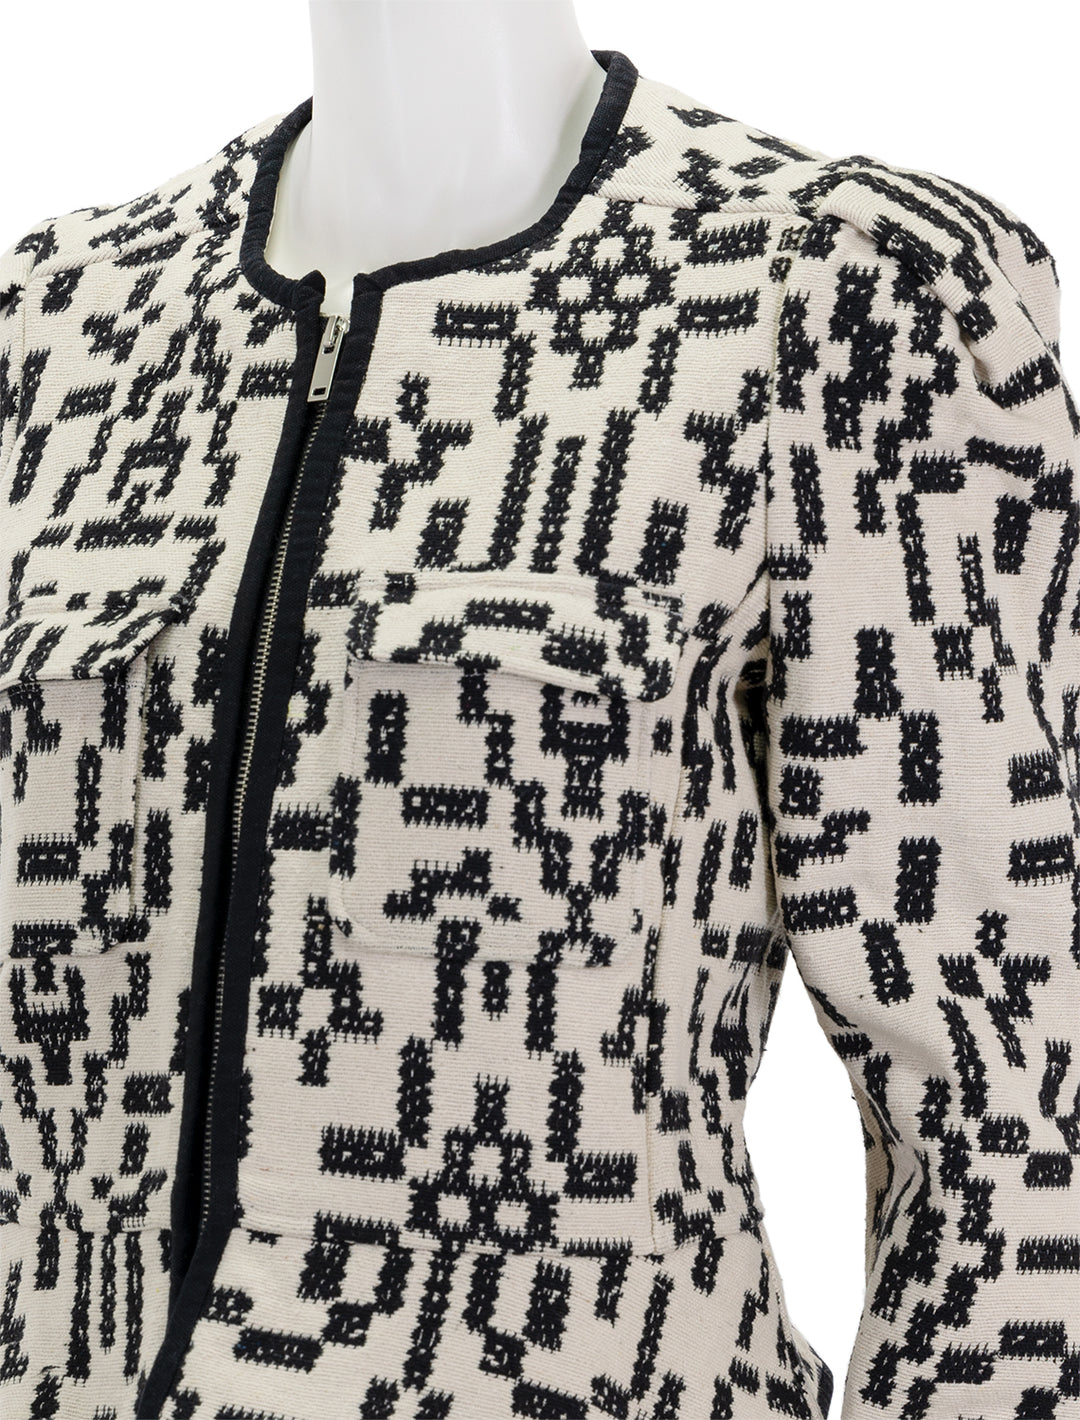 Close-up view of Isabel Marant Etoile's deliona jacket in black and white.